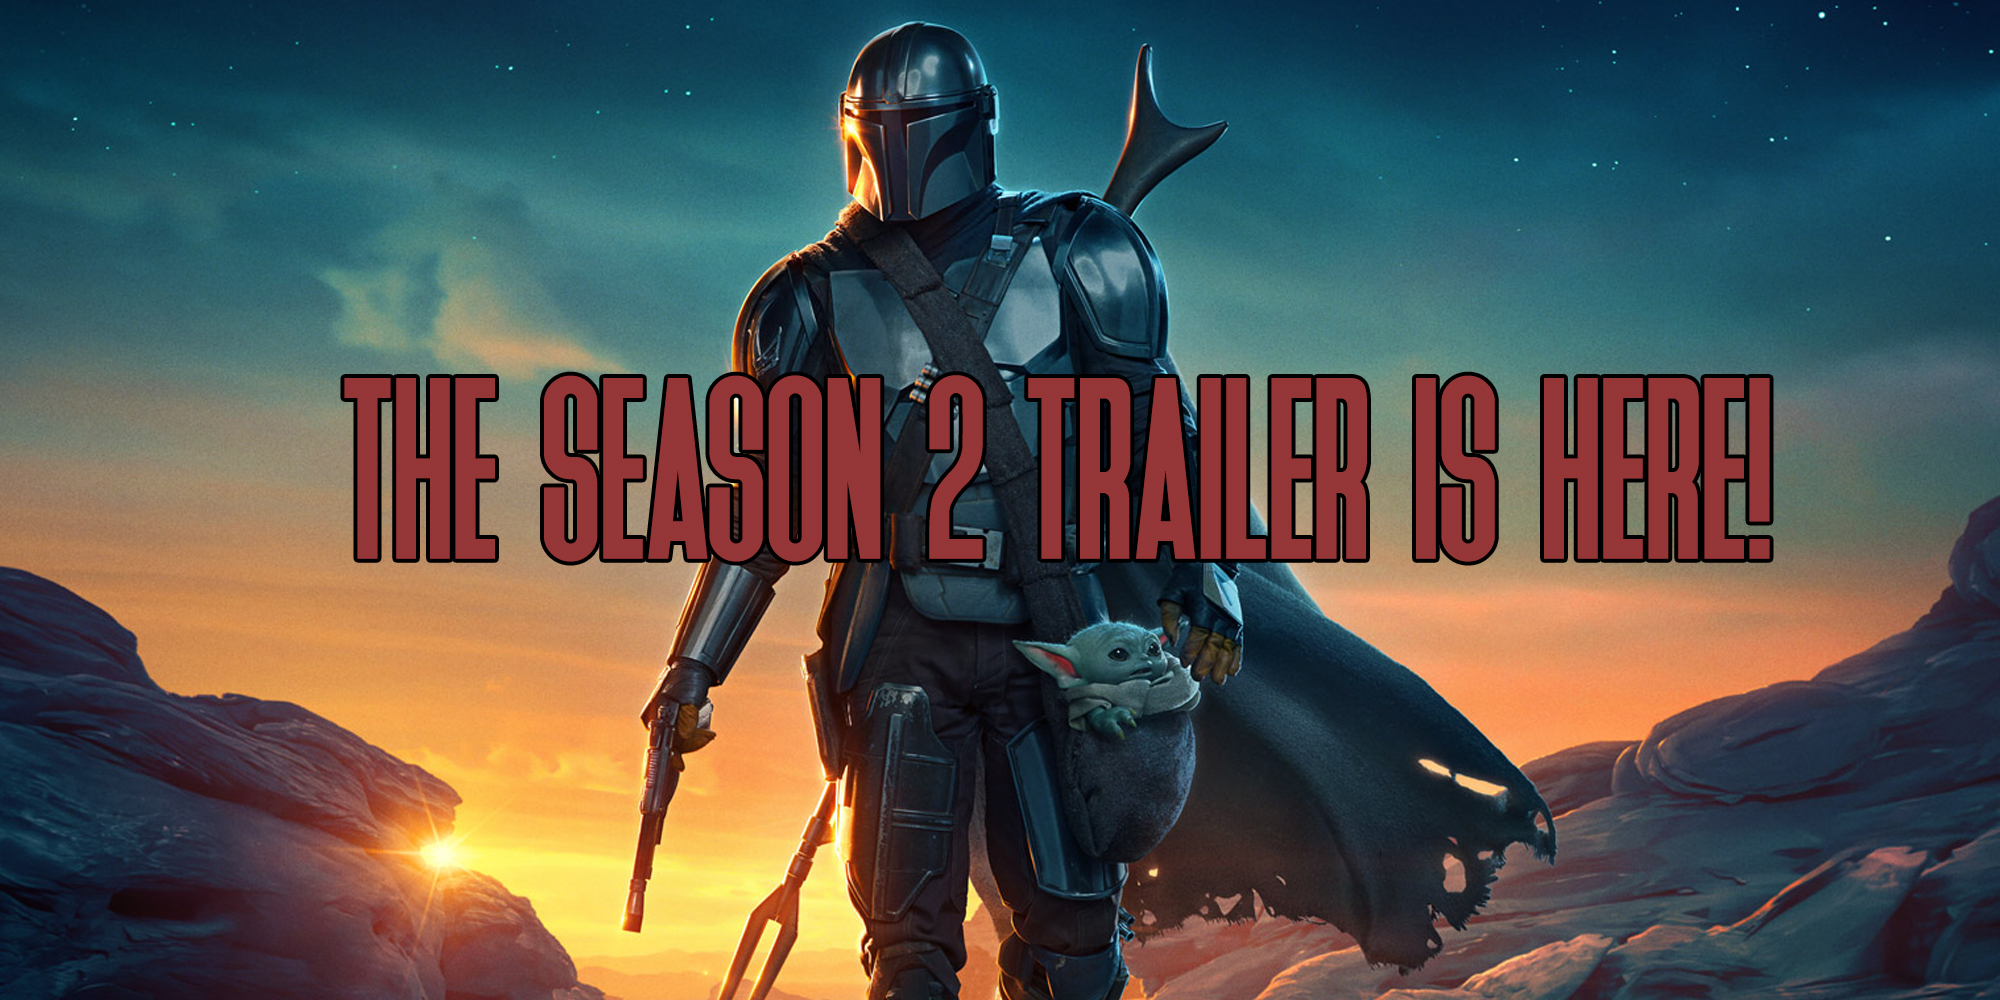 The Season 2 Trailer For The Mandalorian Is Here